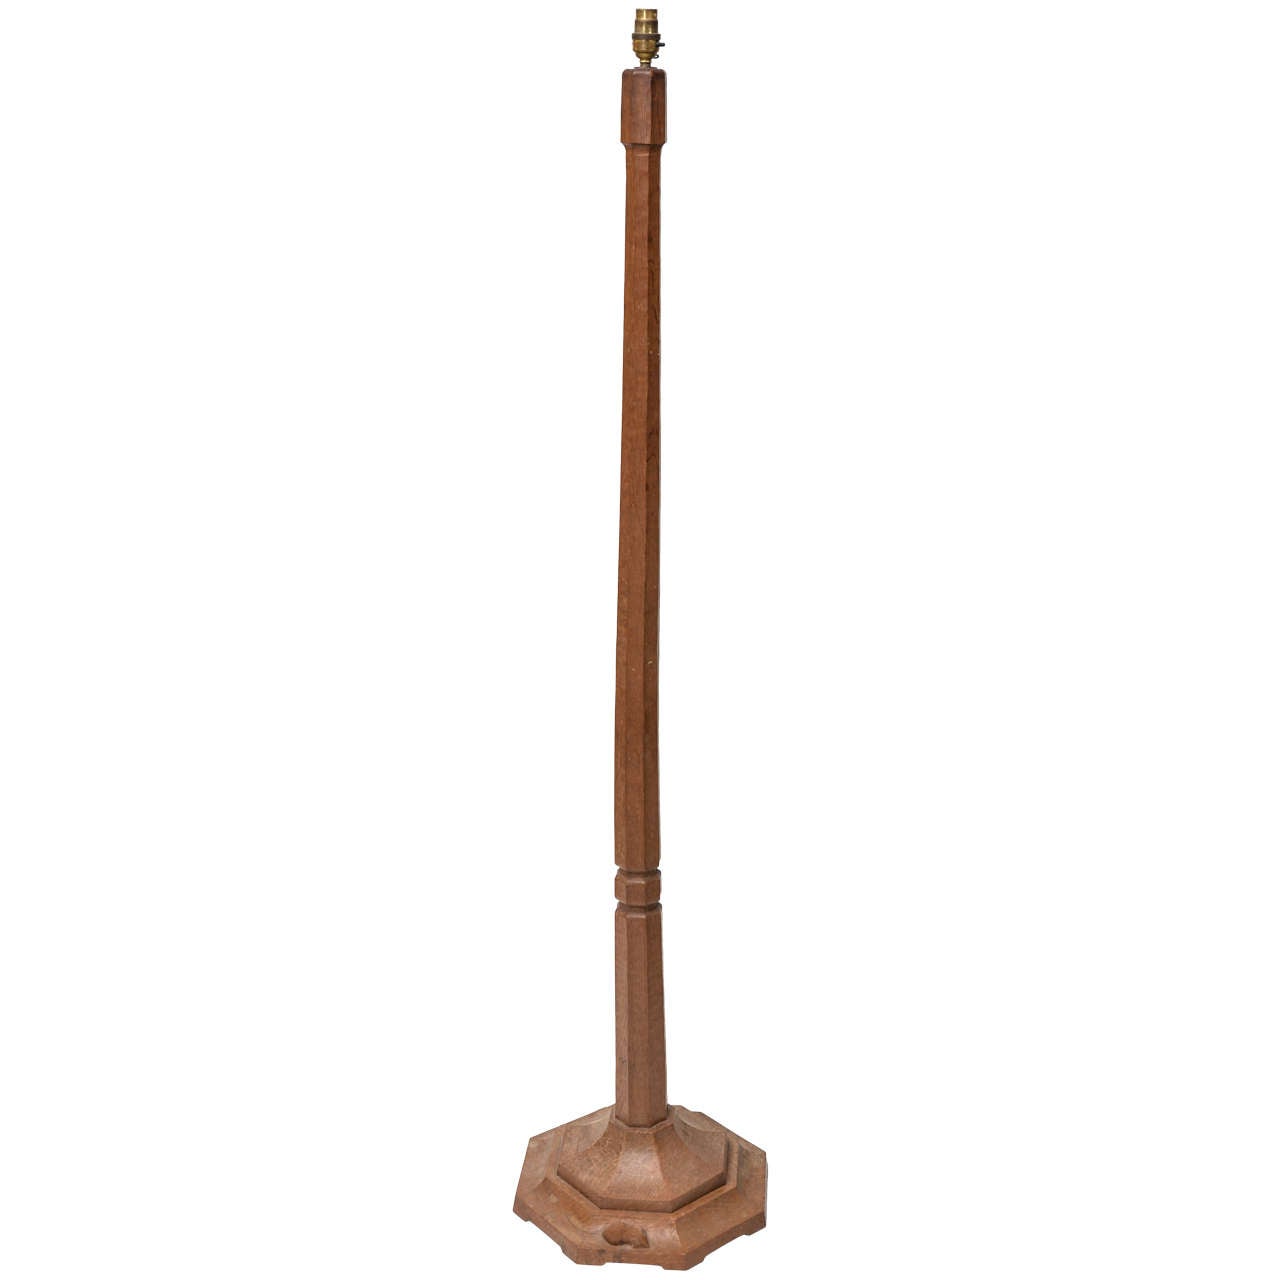 Mouseman English Oak Standing Lamp with Polygonal Base and Fat "Mousey" For Sale